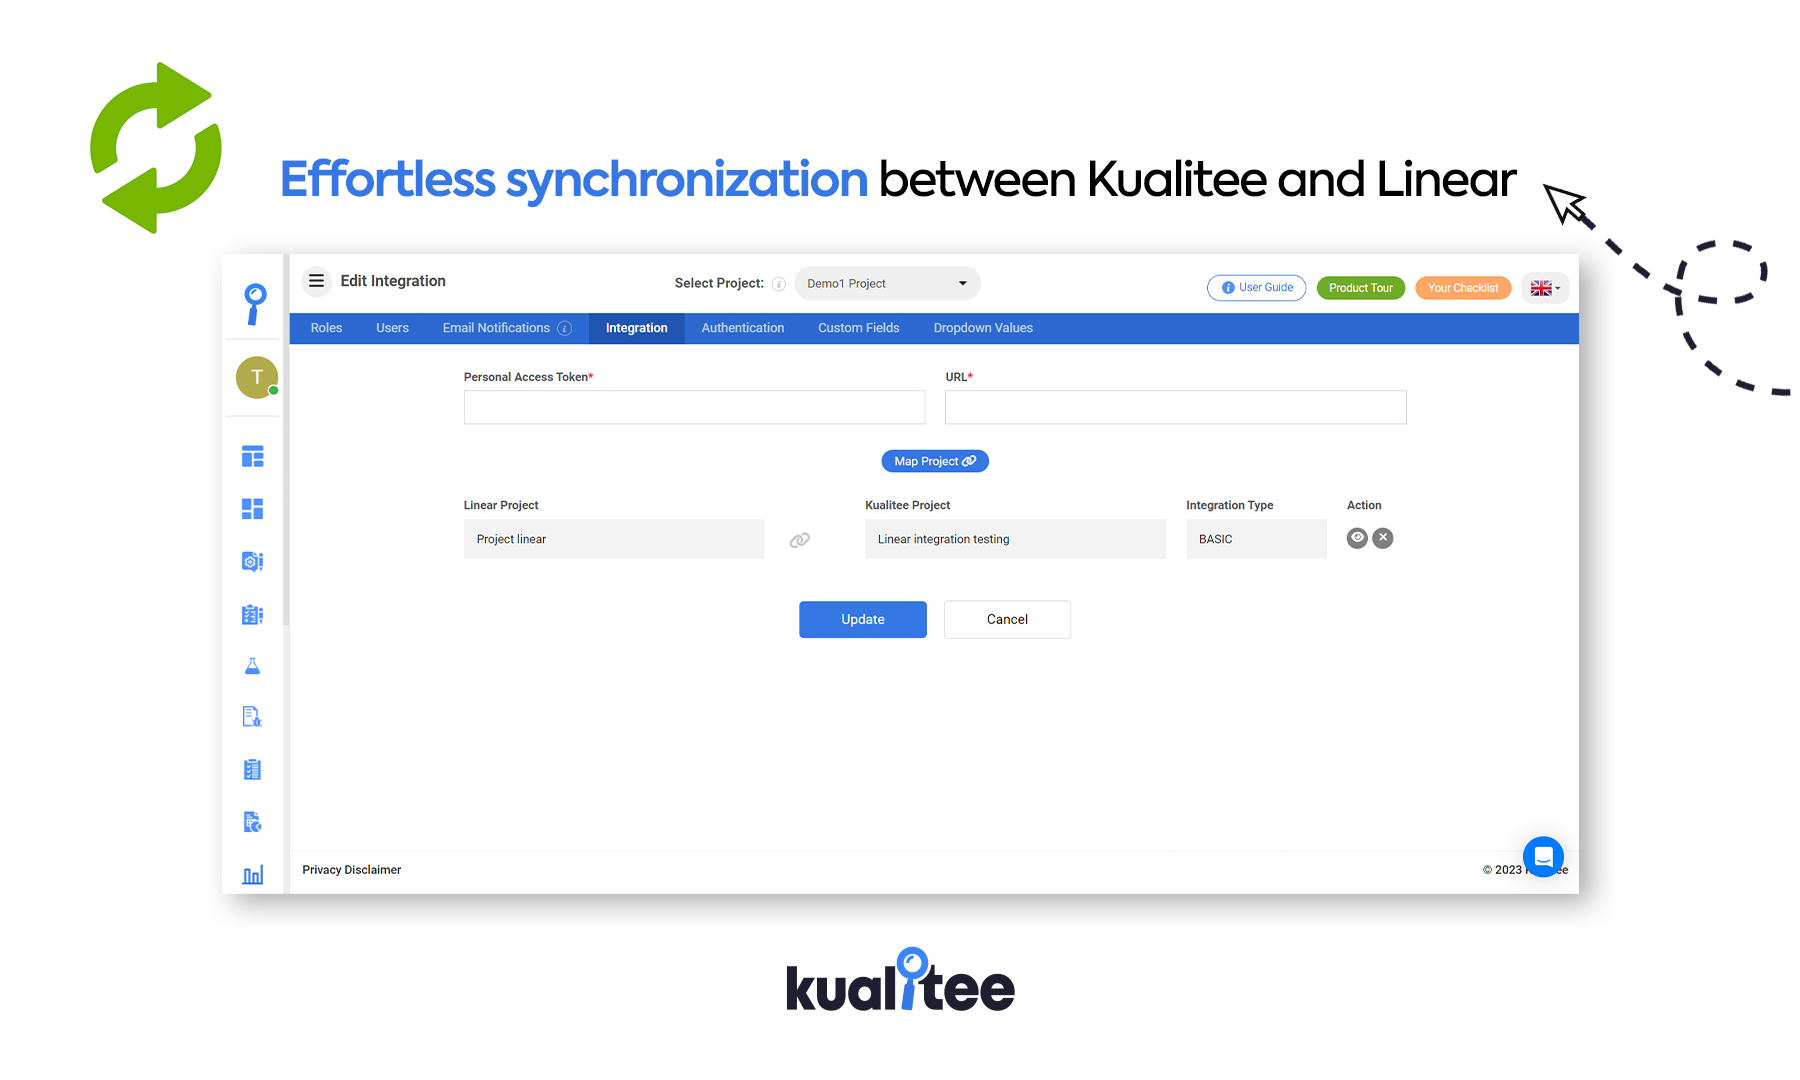 kualitee interface syncing to Linear